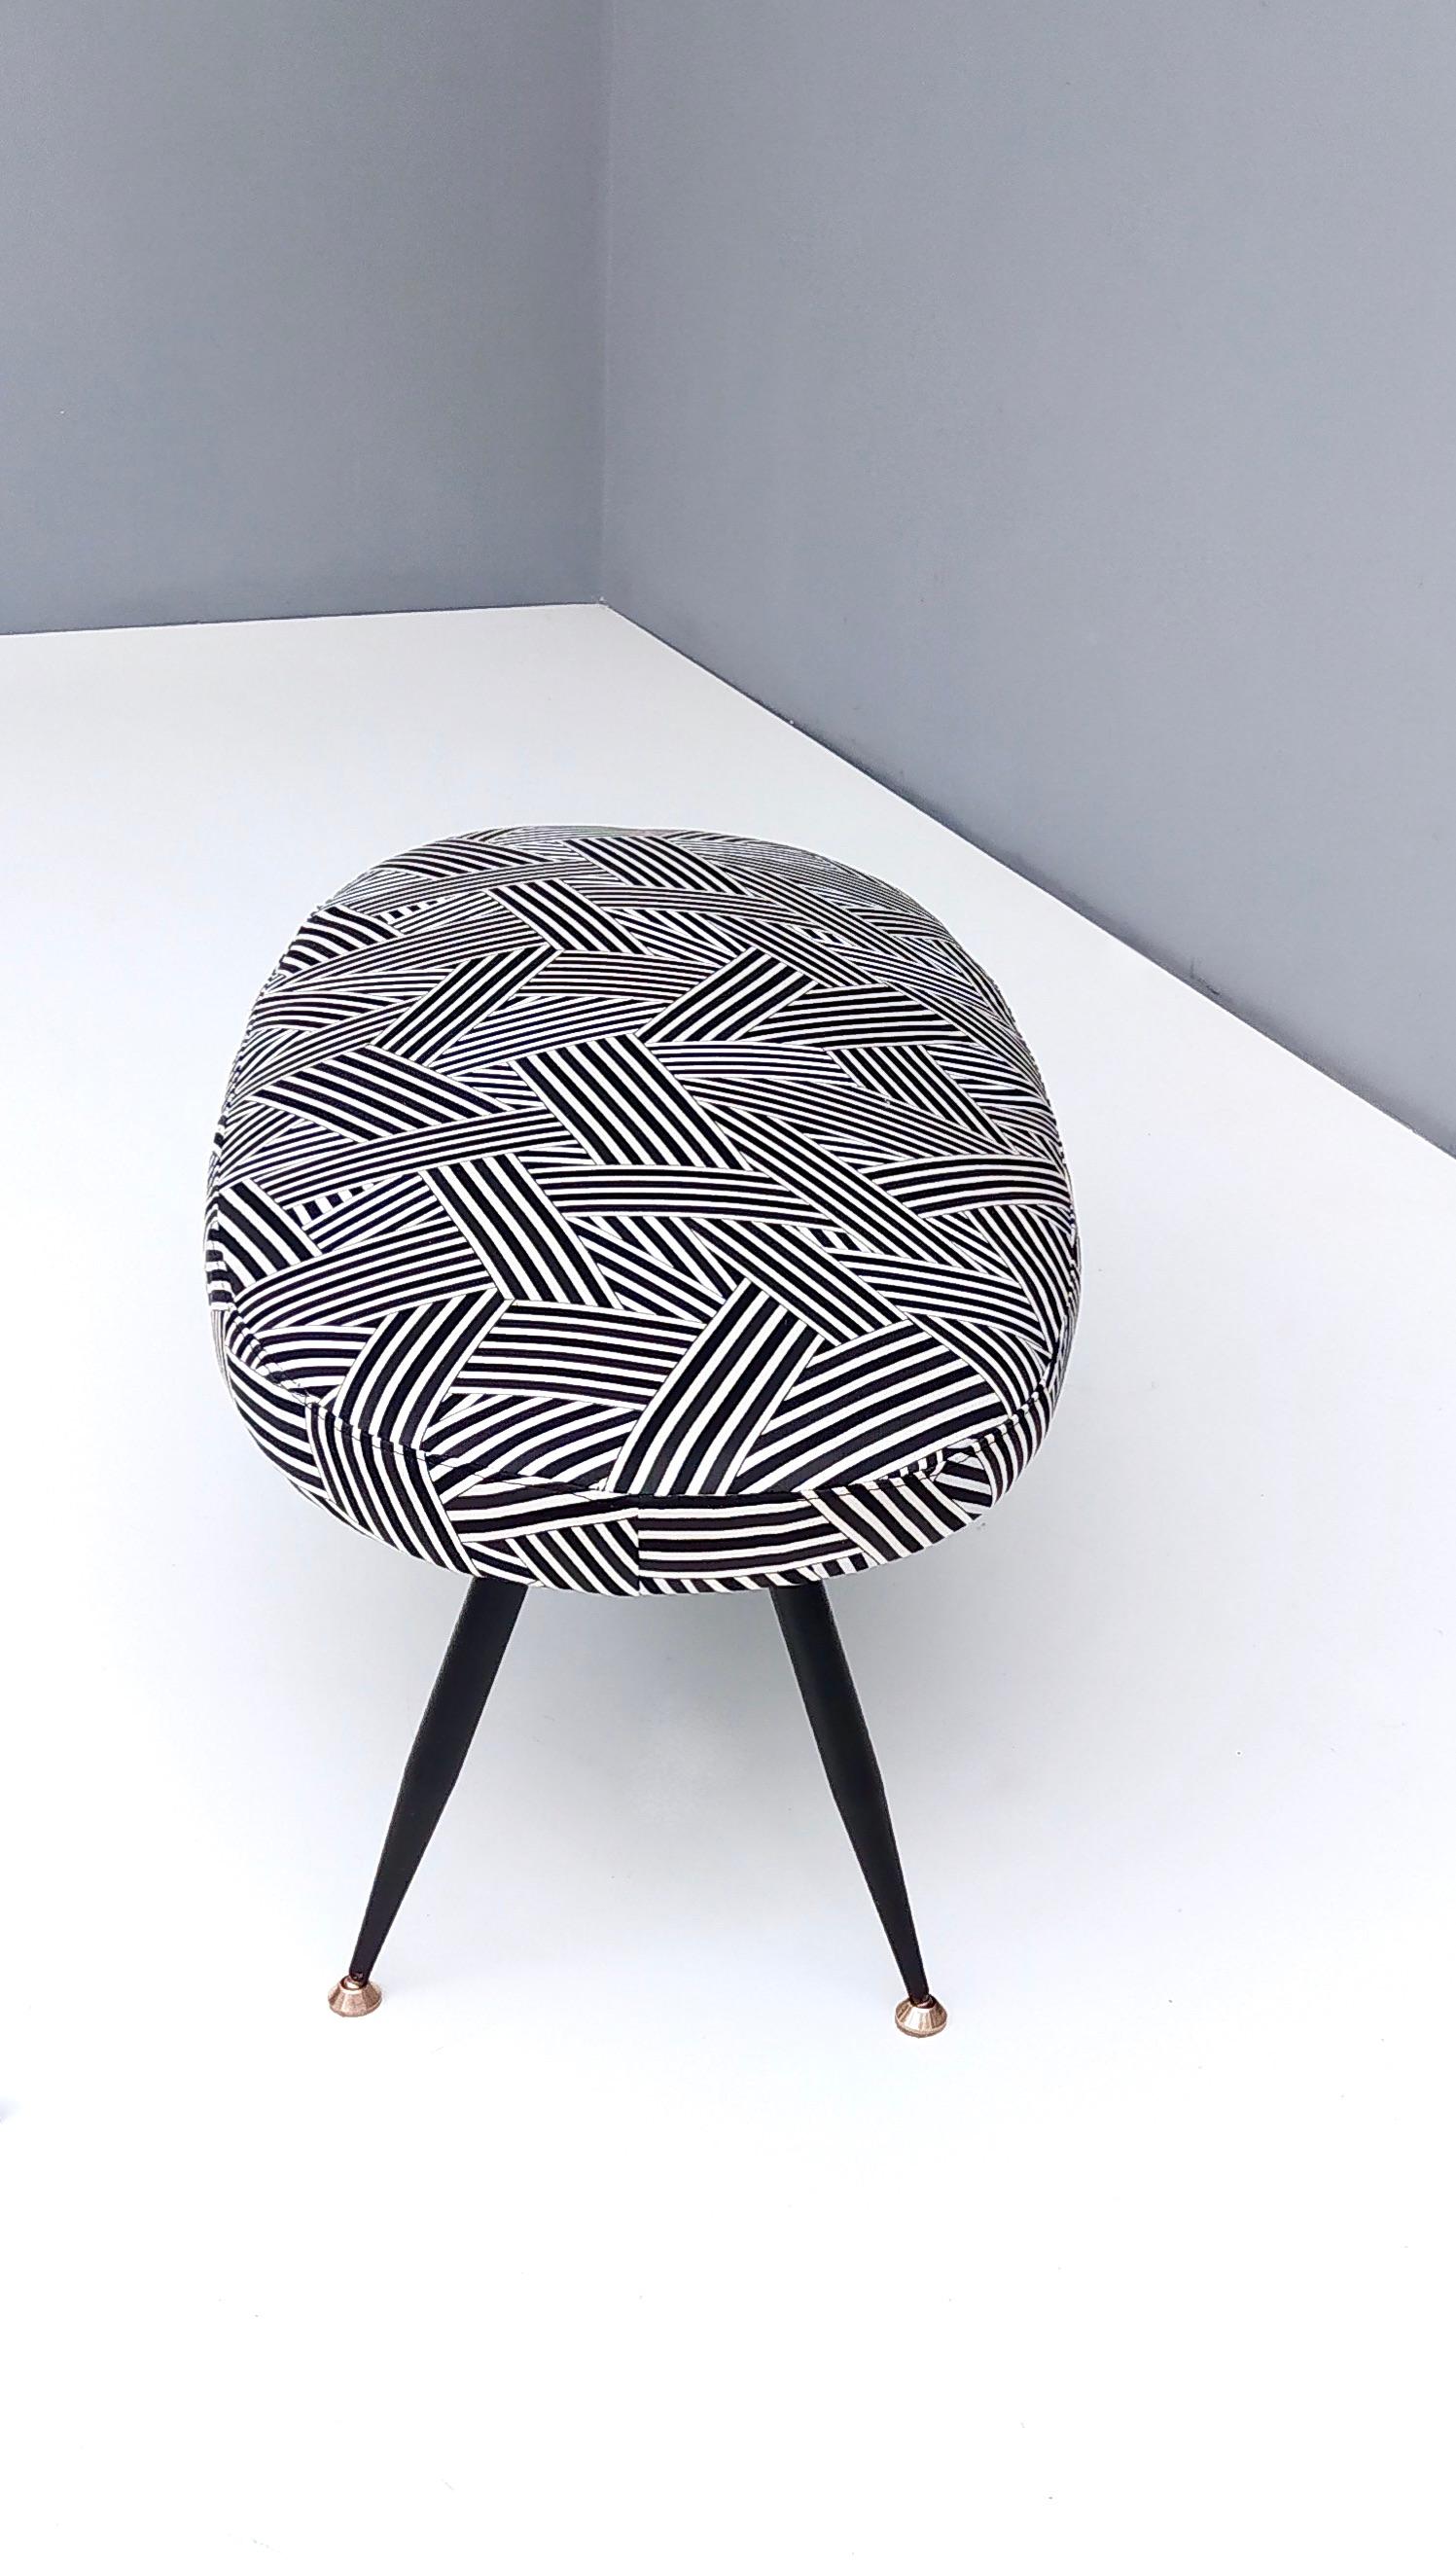 Mid-Century Modern Vintage Oval Pouf with Black and White Fabric Upholstery by Dedar